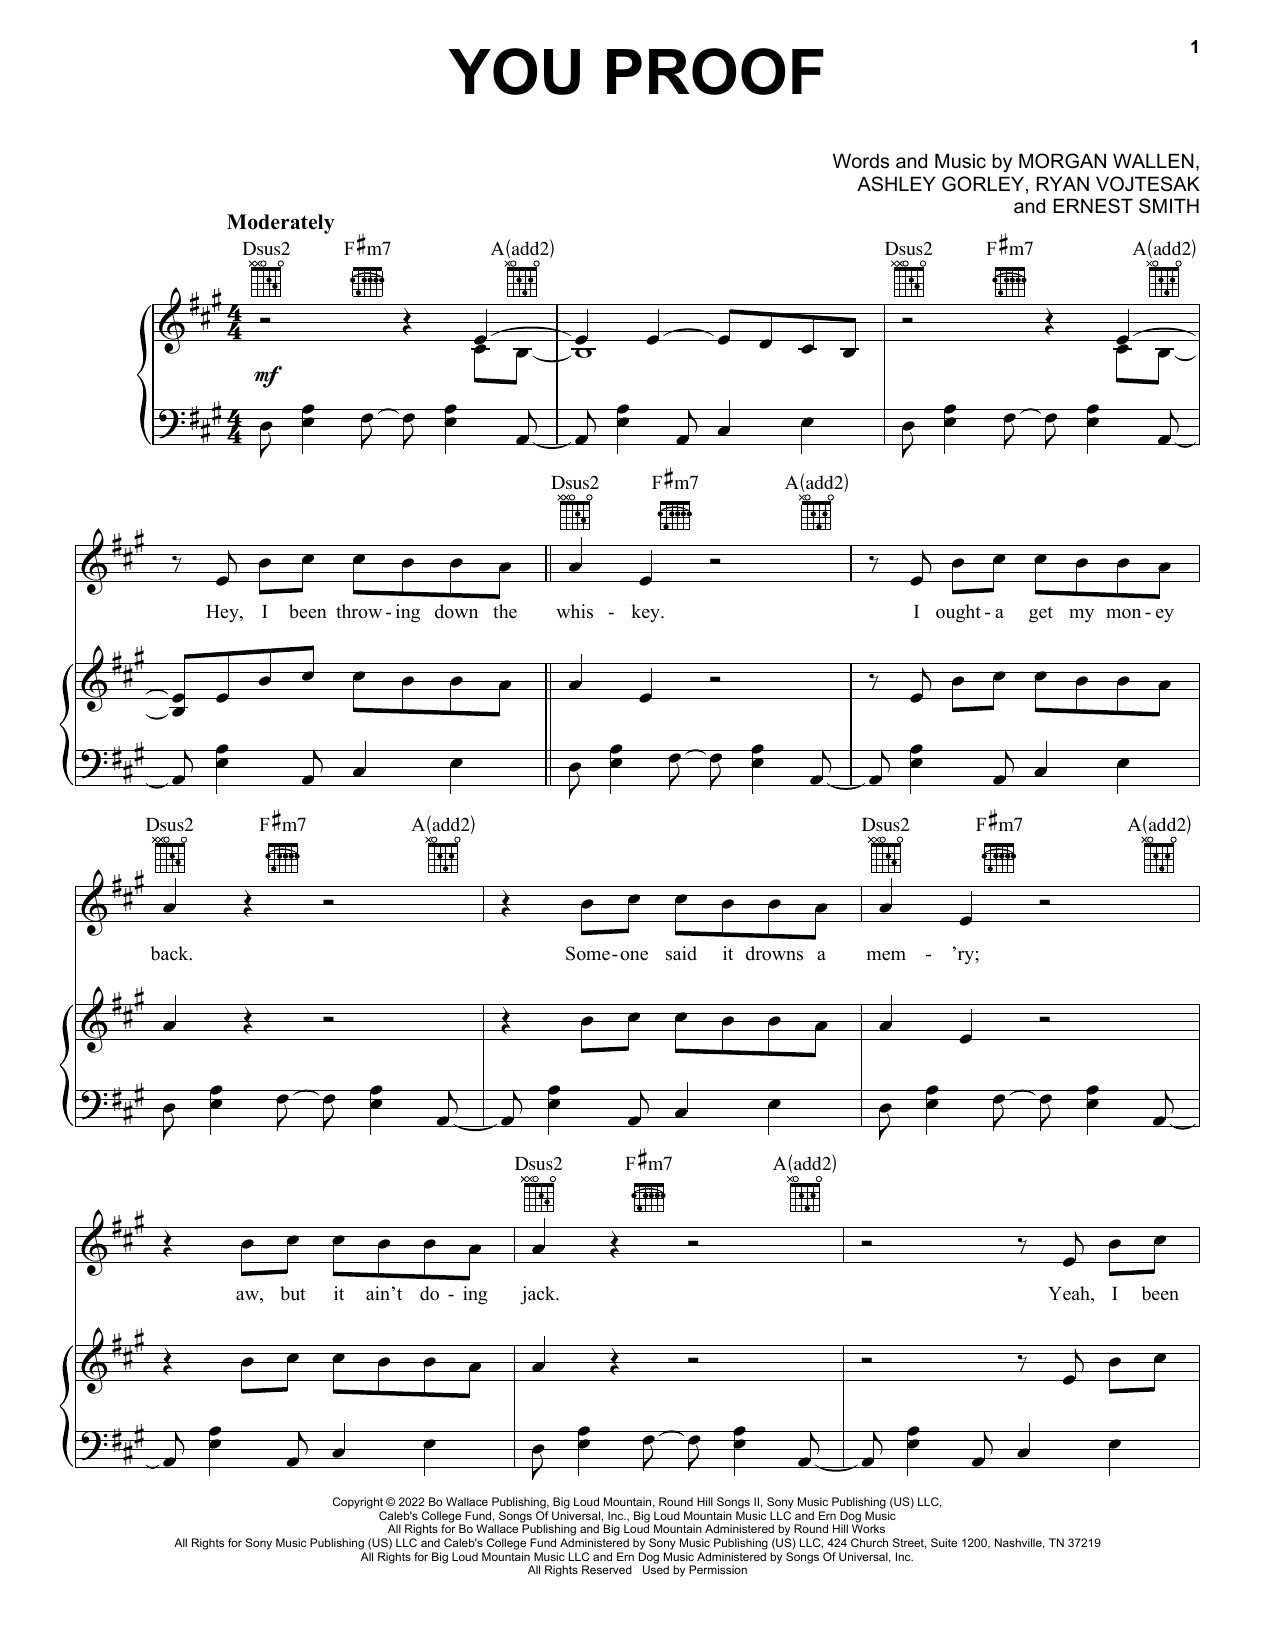 Morgan Wallen You Proof sheet music notes and chords. Download Printable PDF.